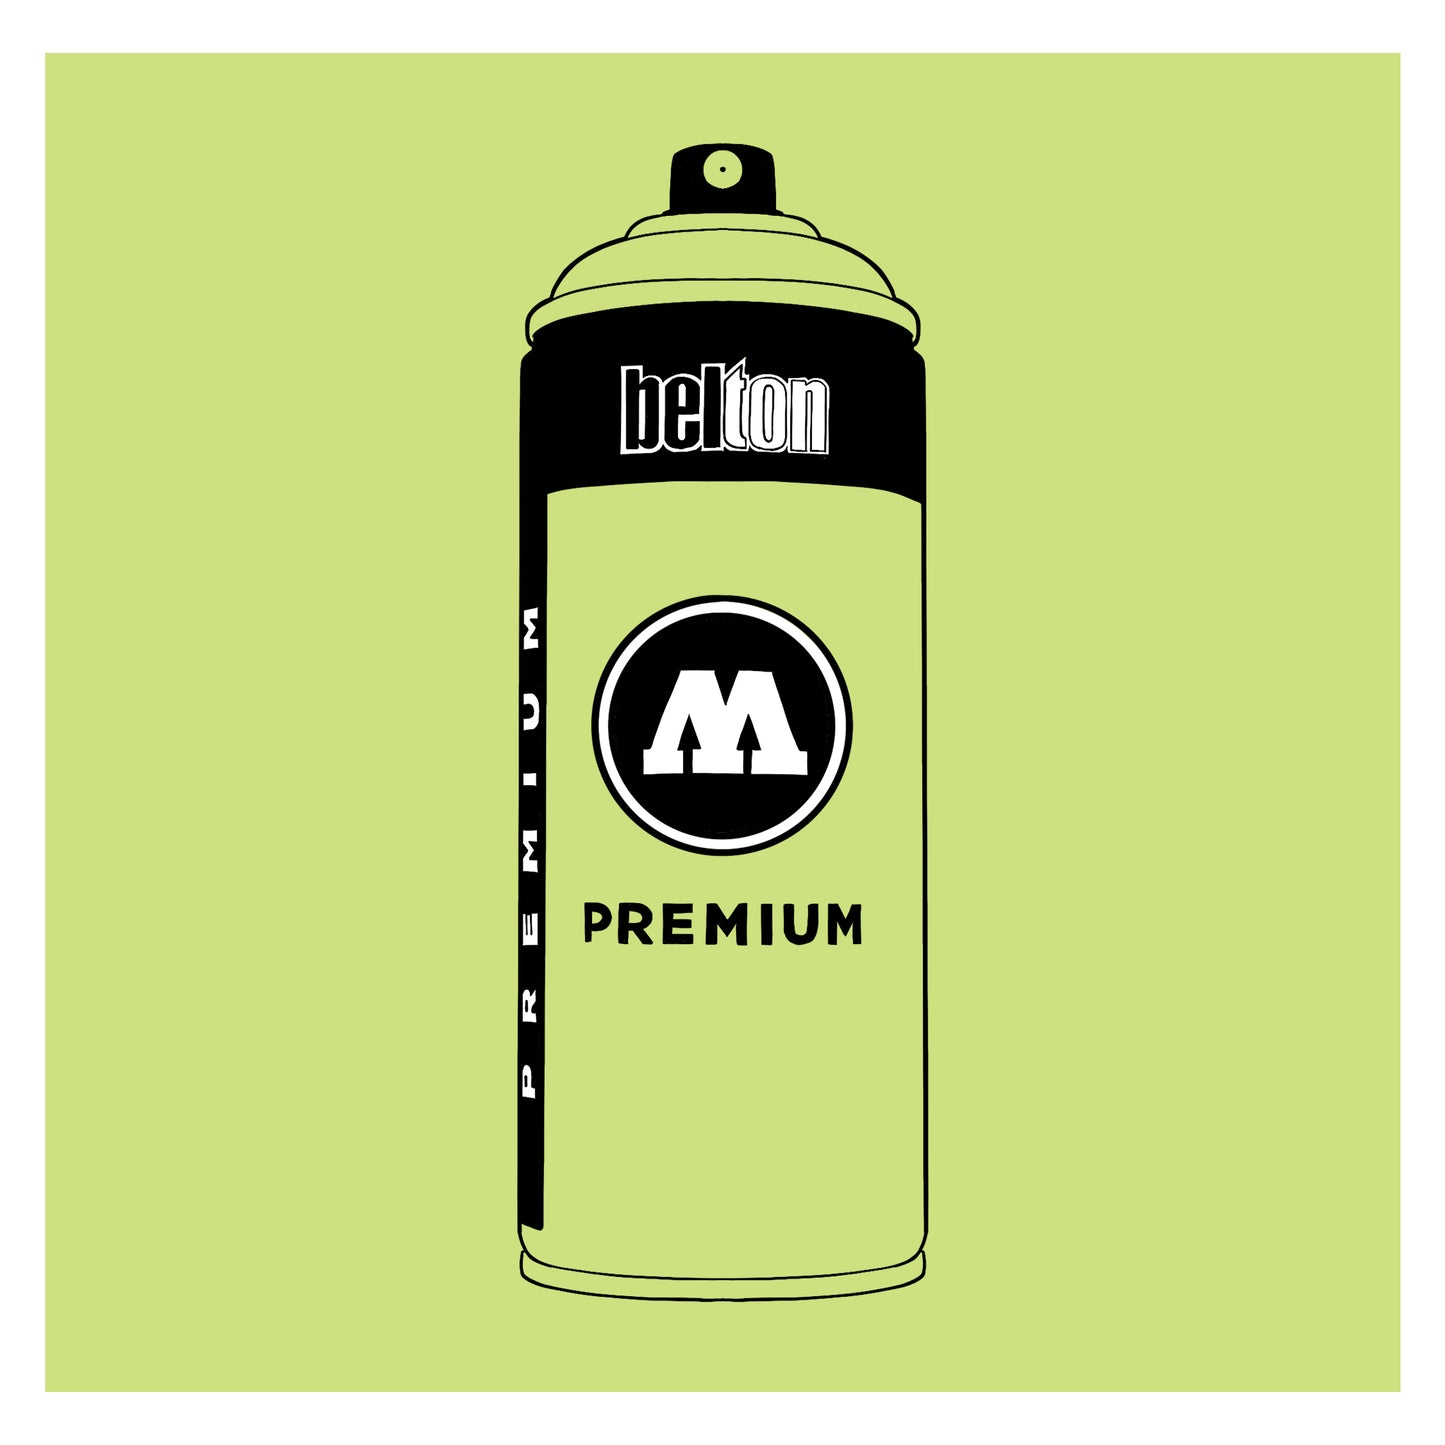 A black outline drawing of a pastel lime green spray paint can with the words "belton","premium" and the letter"M" written on the face in black and white font. The background is a color swatch of the same pastel green with a white border